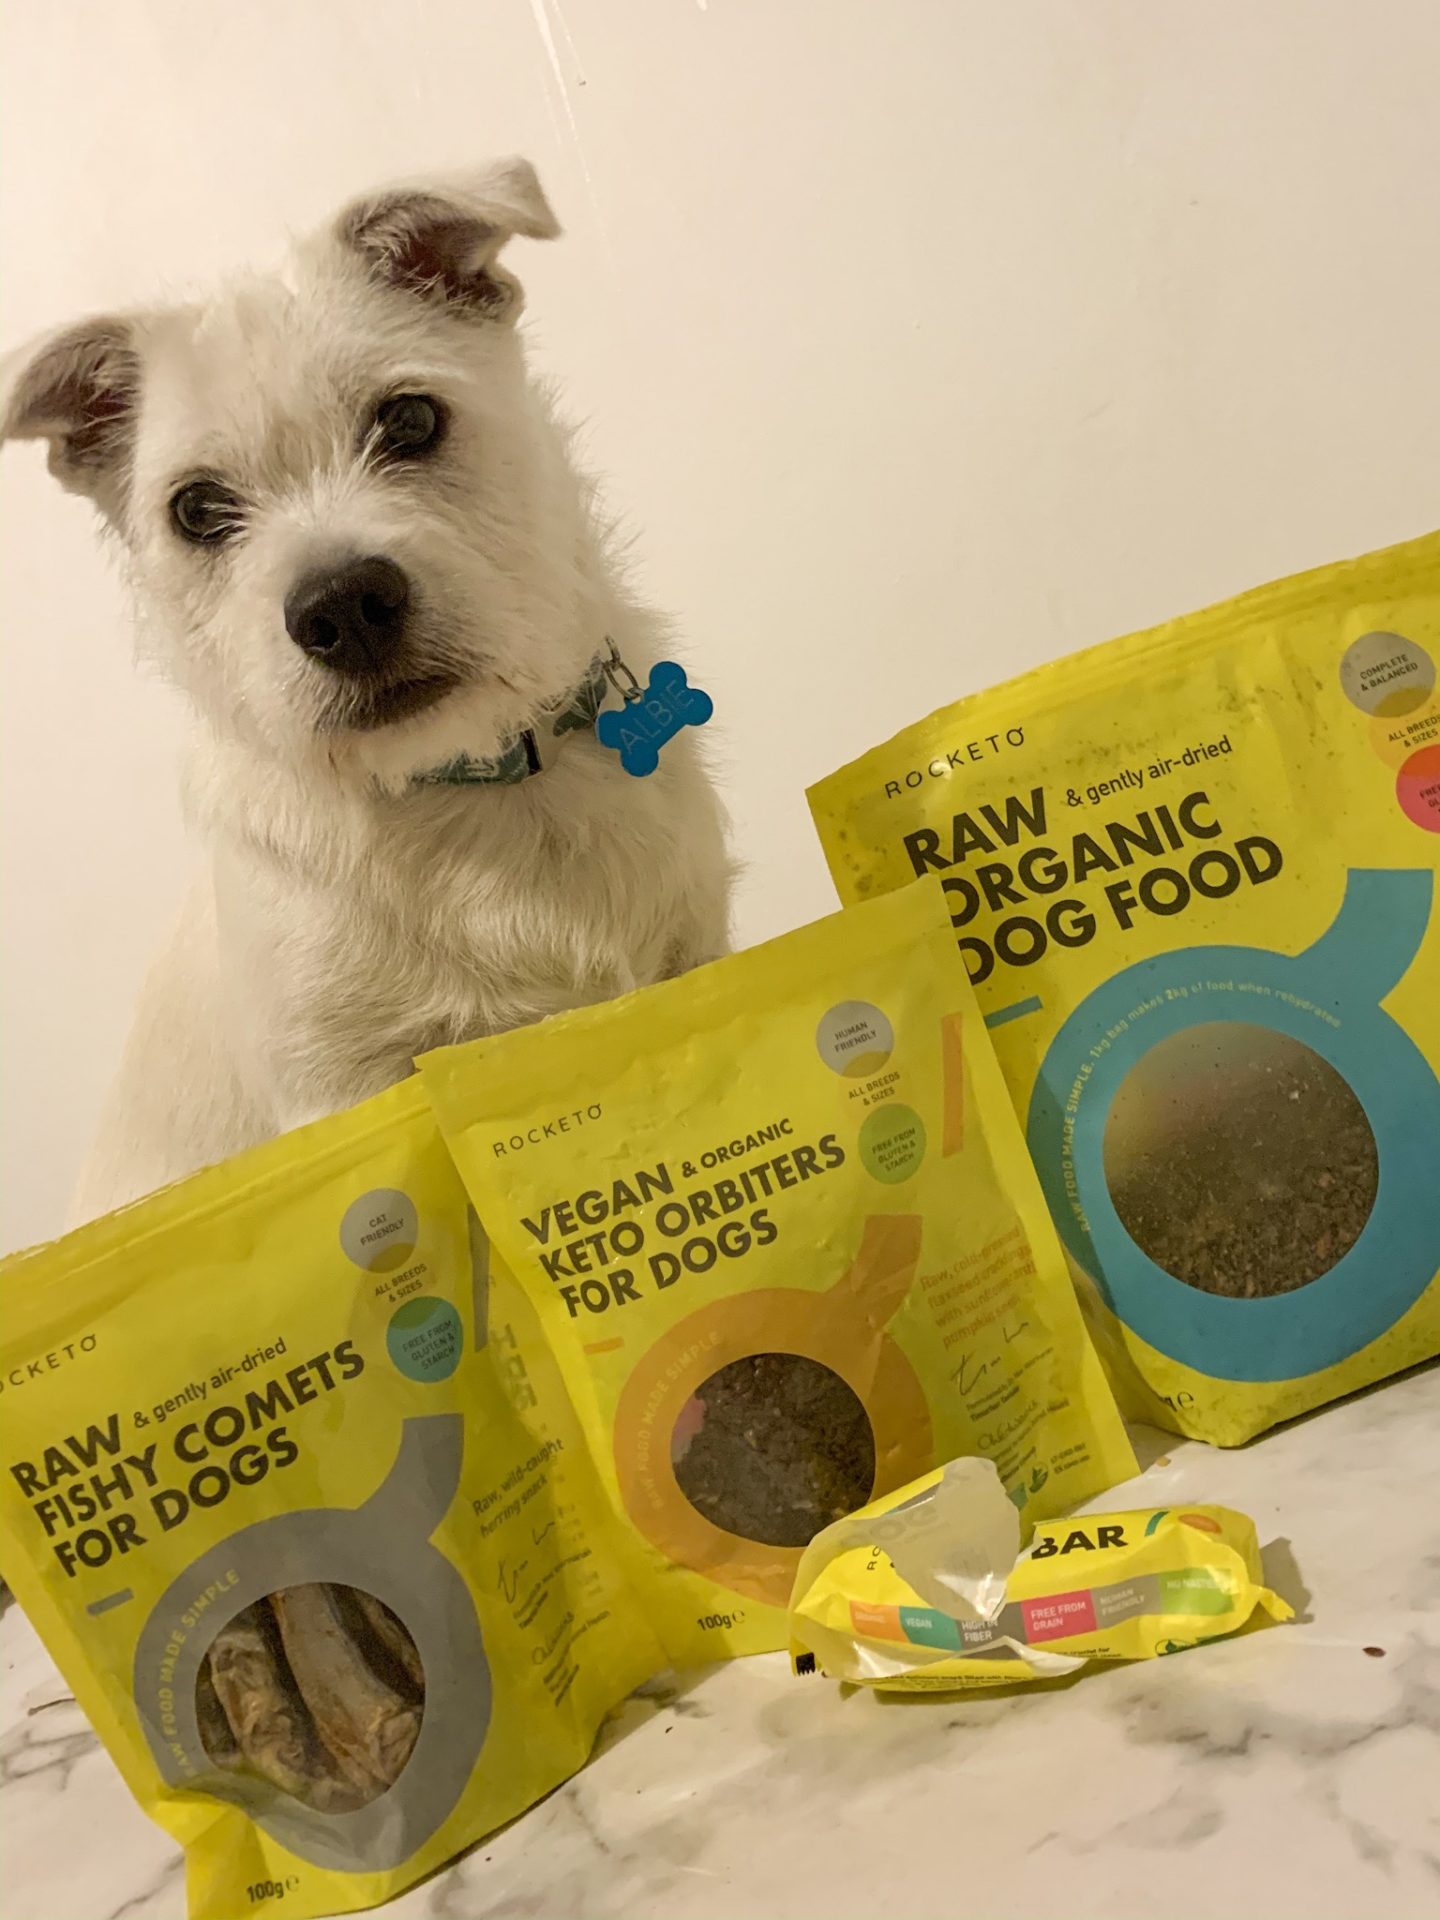 Is Rocketo raw dog food good for your dog? | Review